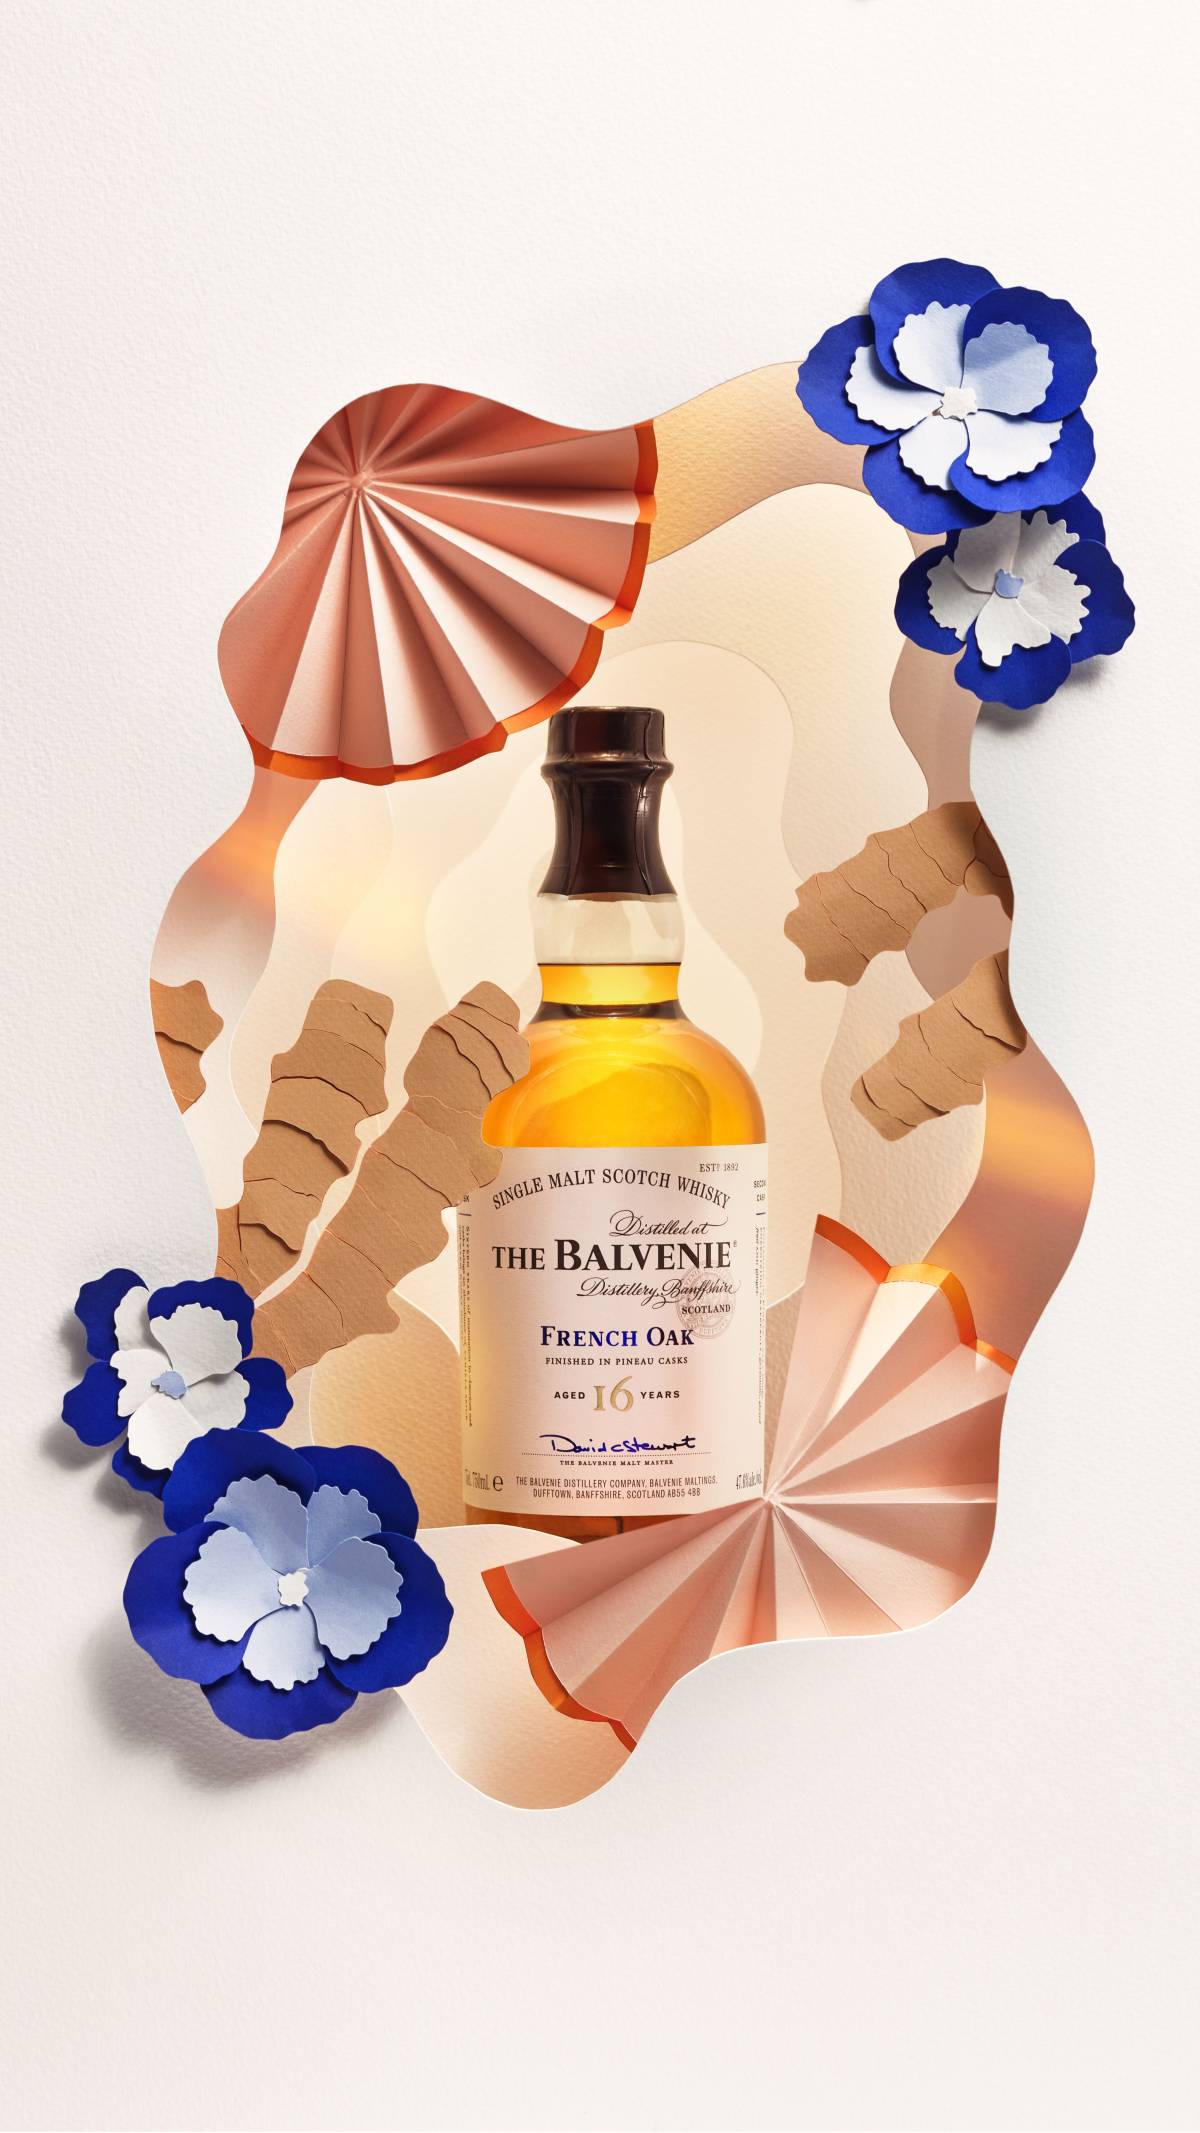  The Balvenie Unveils Unparalleled Depth of Flavours with Cask Finishes Range Featuring Three New Expressions  